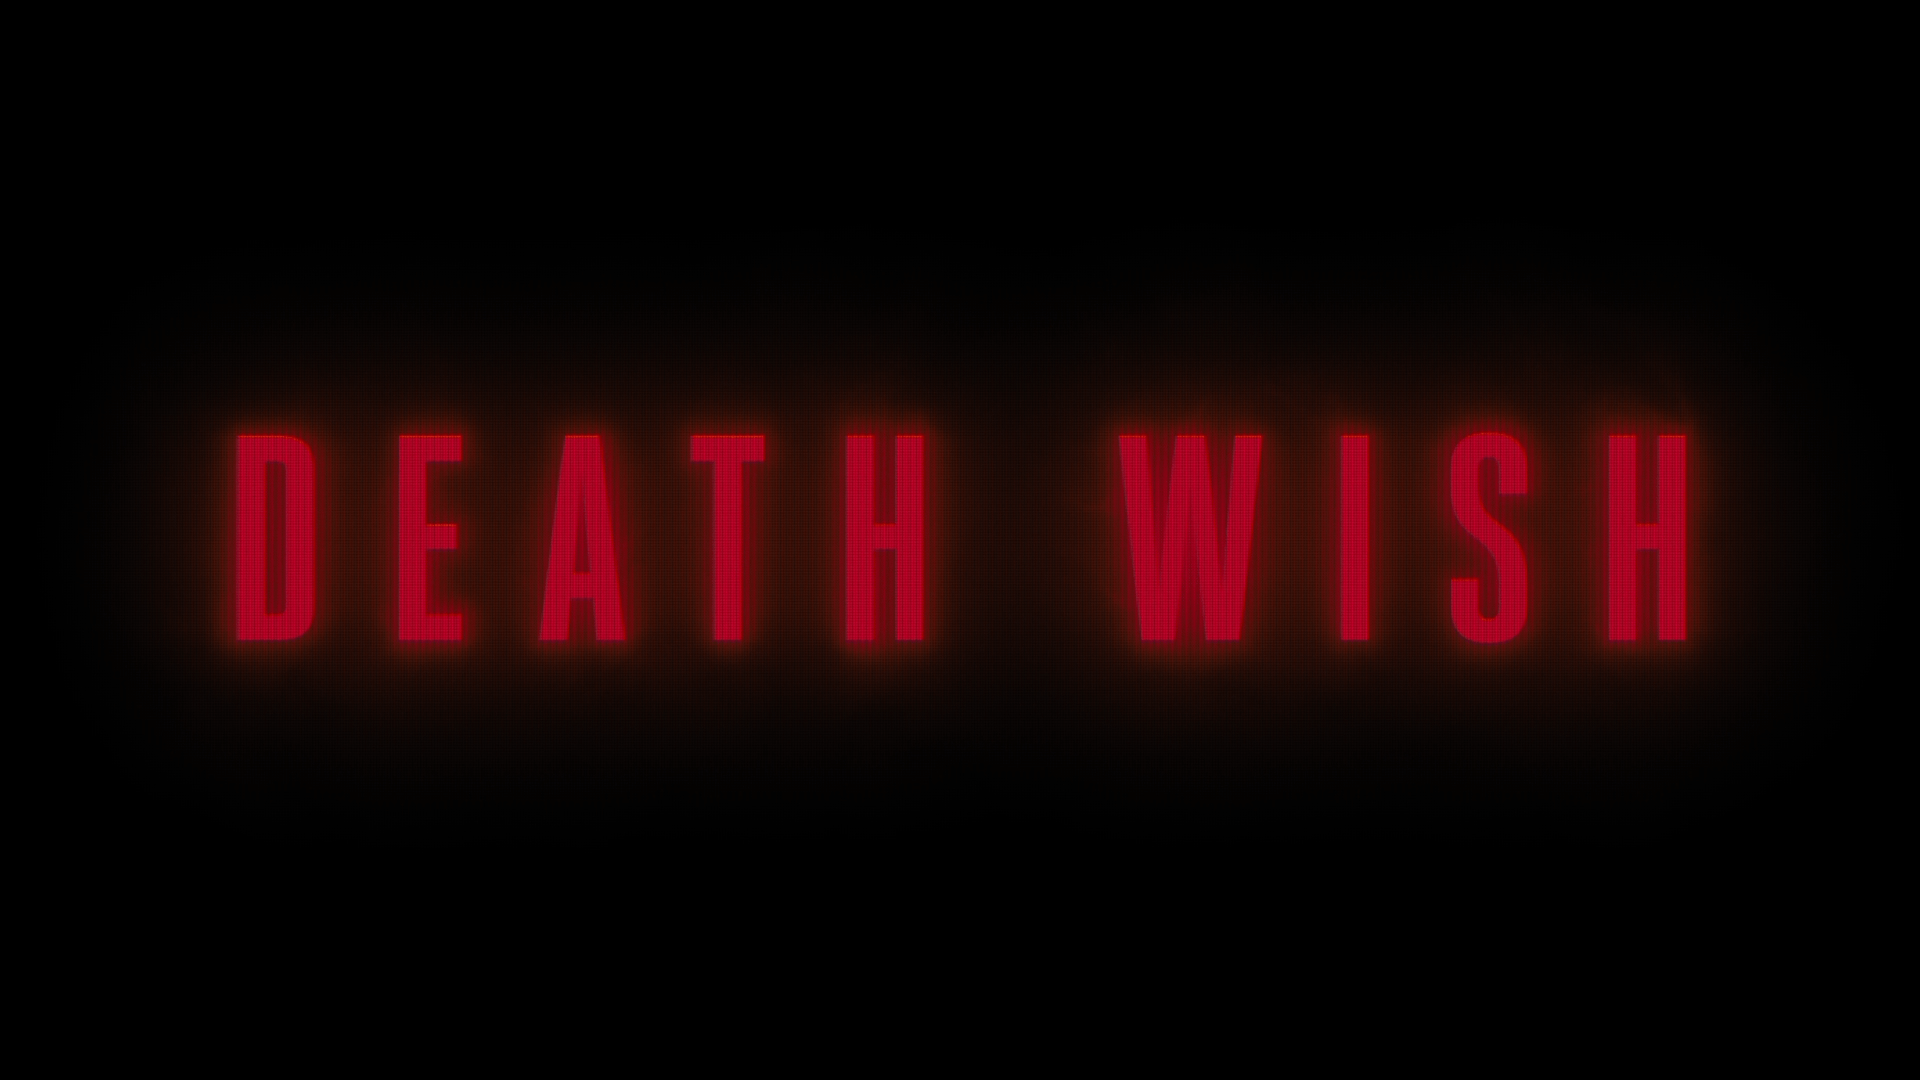 Free download Deathwish Live Wallpaper Free for android Deathwish Live  Wallpaper 288x512 for your Desktop Mobile  Tablet  Explore 49  Deathwish Skateboards Wallpaper  Primitive Skateboards Wallpaper Palace  Skateboards Wallpaper Skateboards 